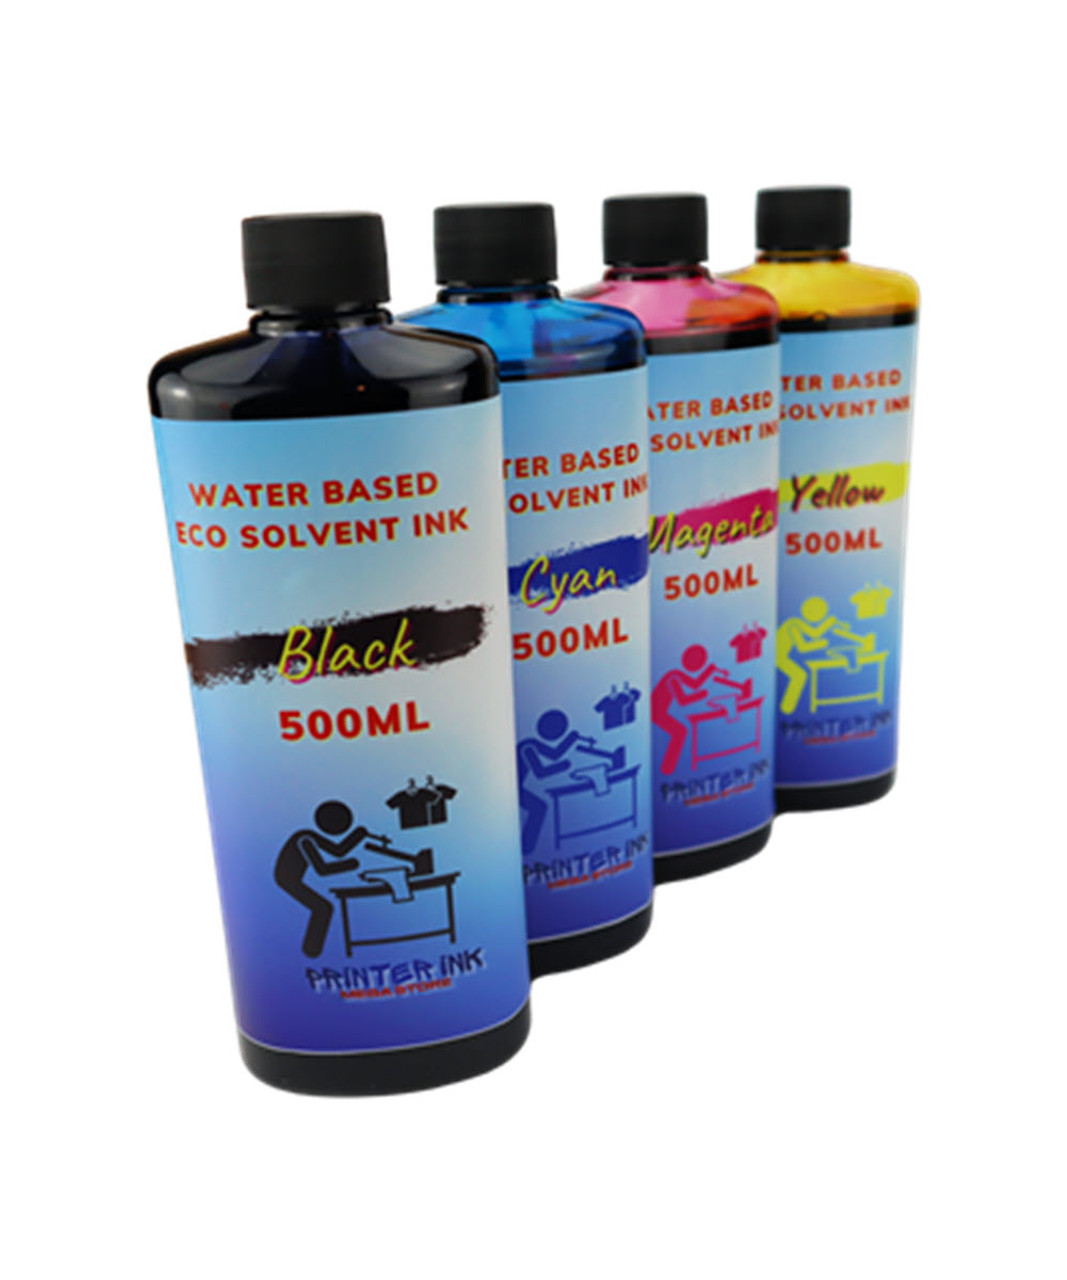 Water Based Eco Solvent Ink 4- 500ml bottles for Epson WorkForce ST-C8000 ST-C8090 Printers